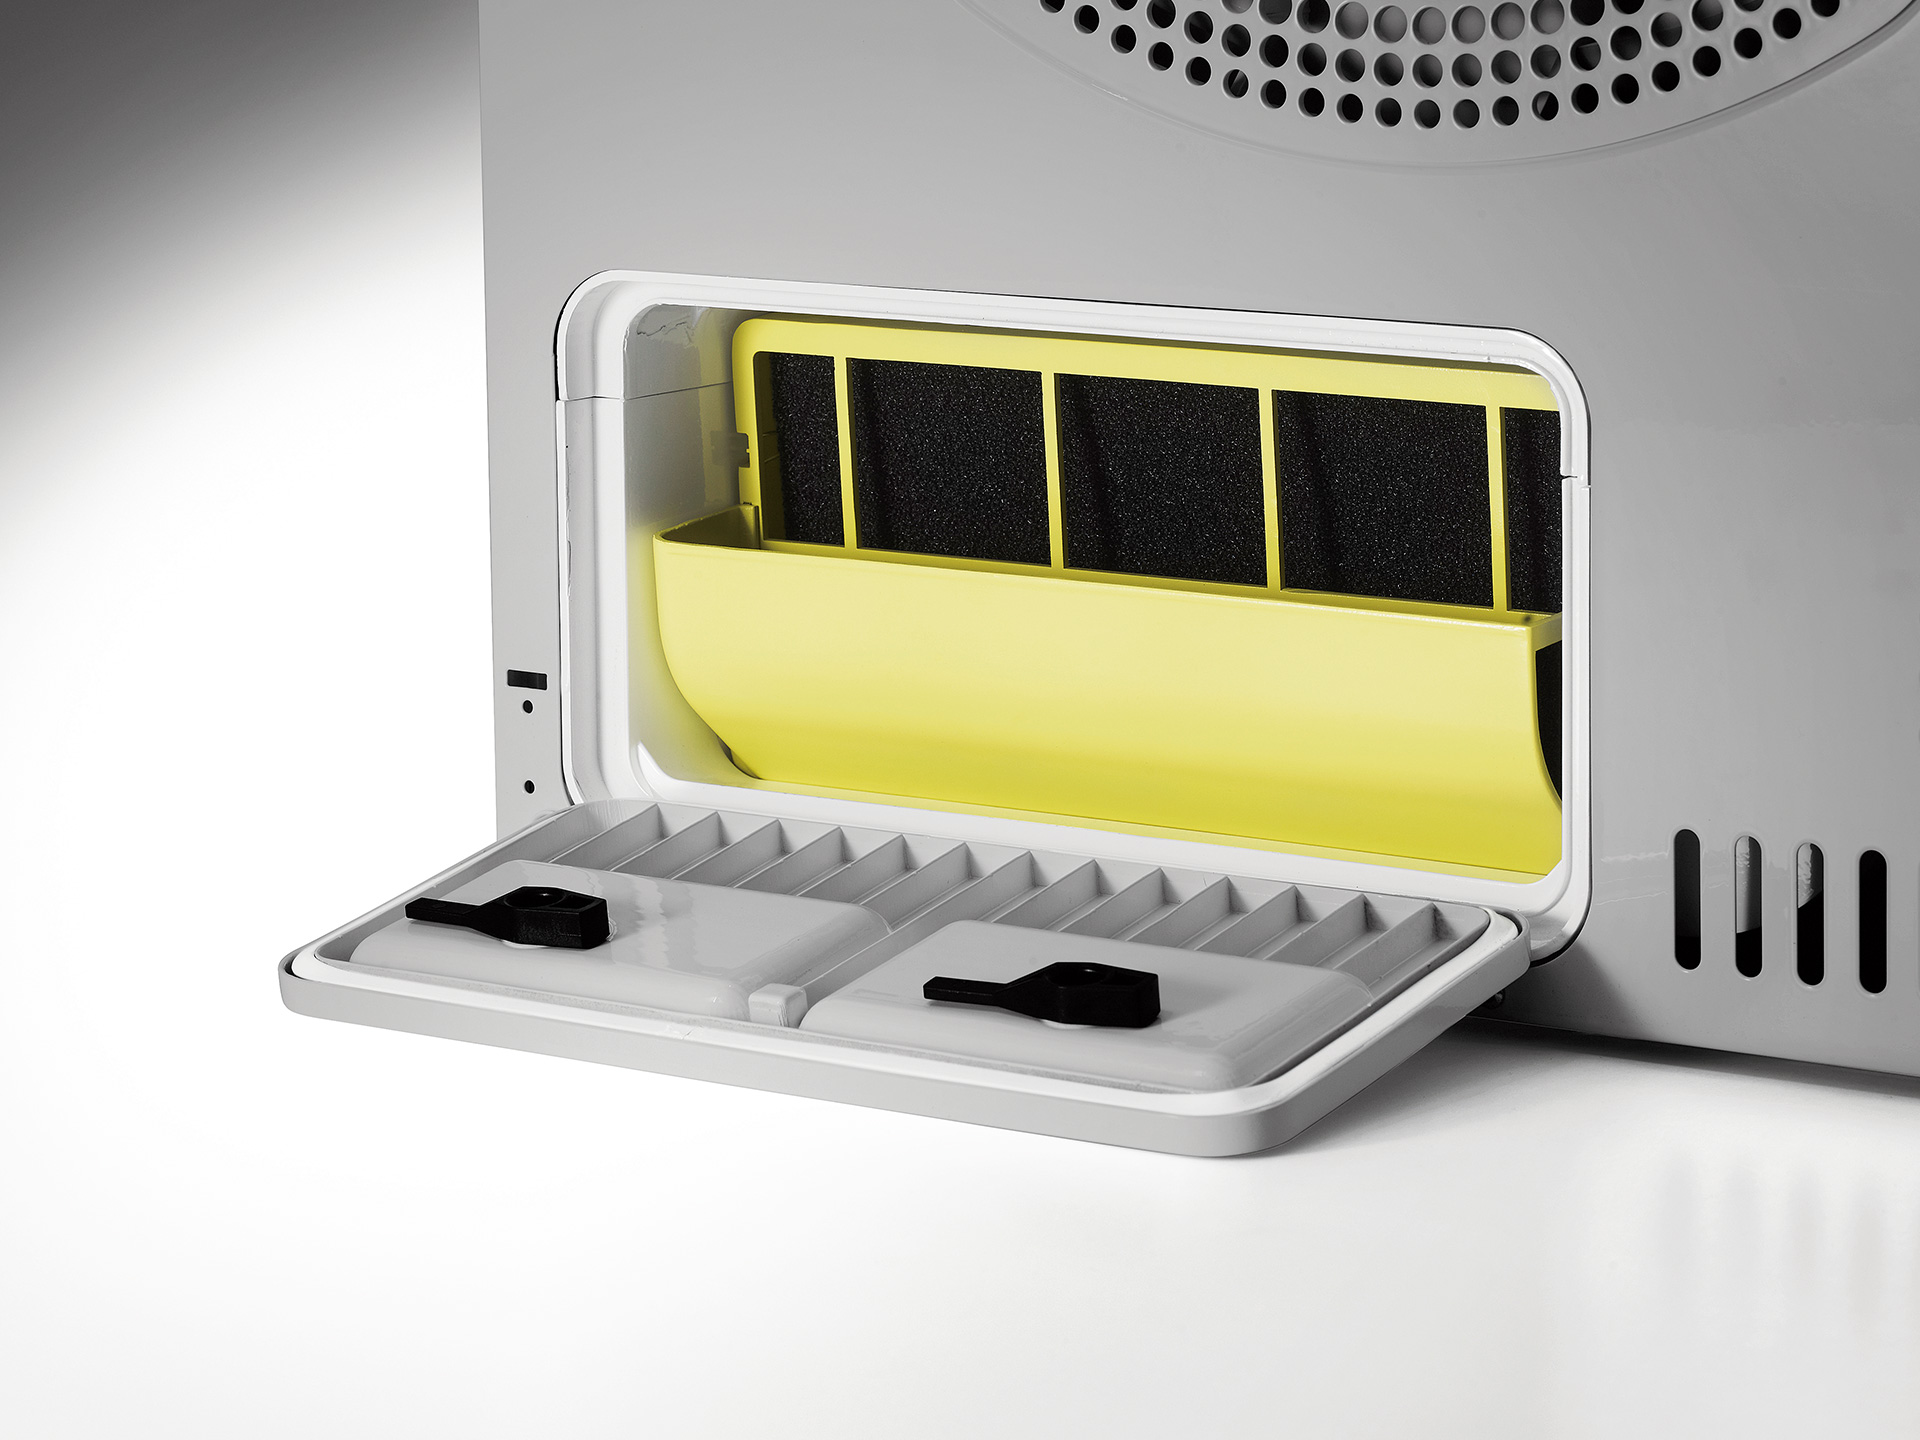 First Portable Microwave: iWaveCube Personal Microwave